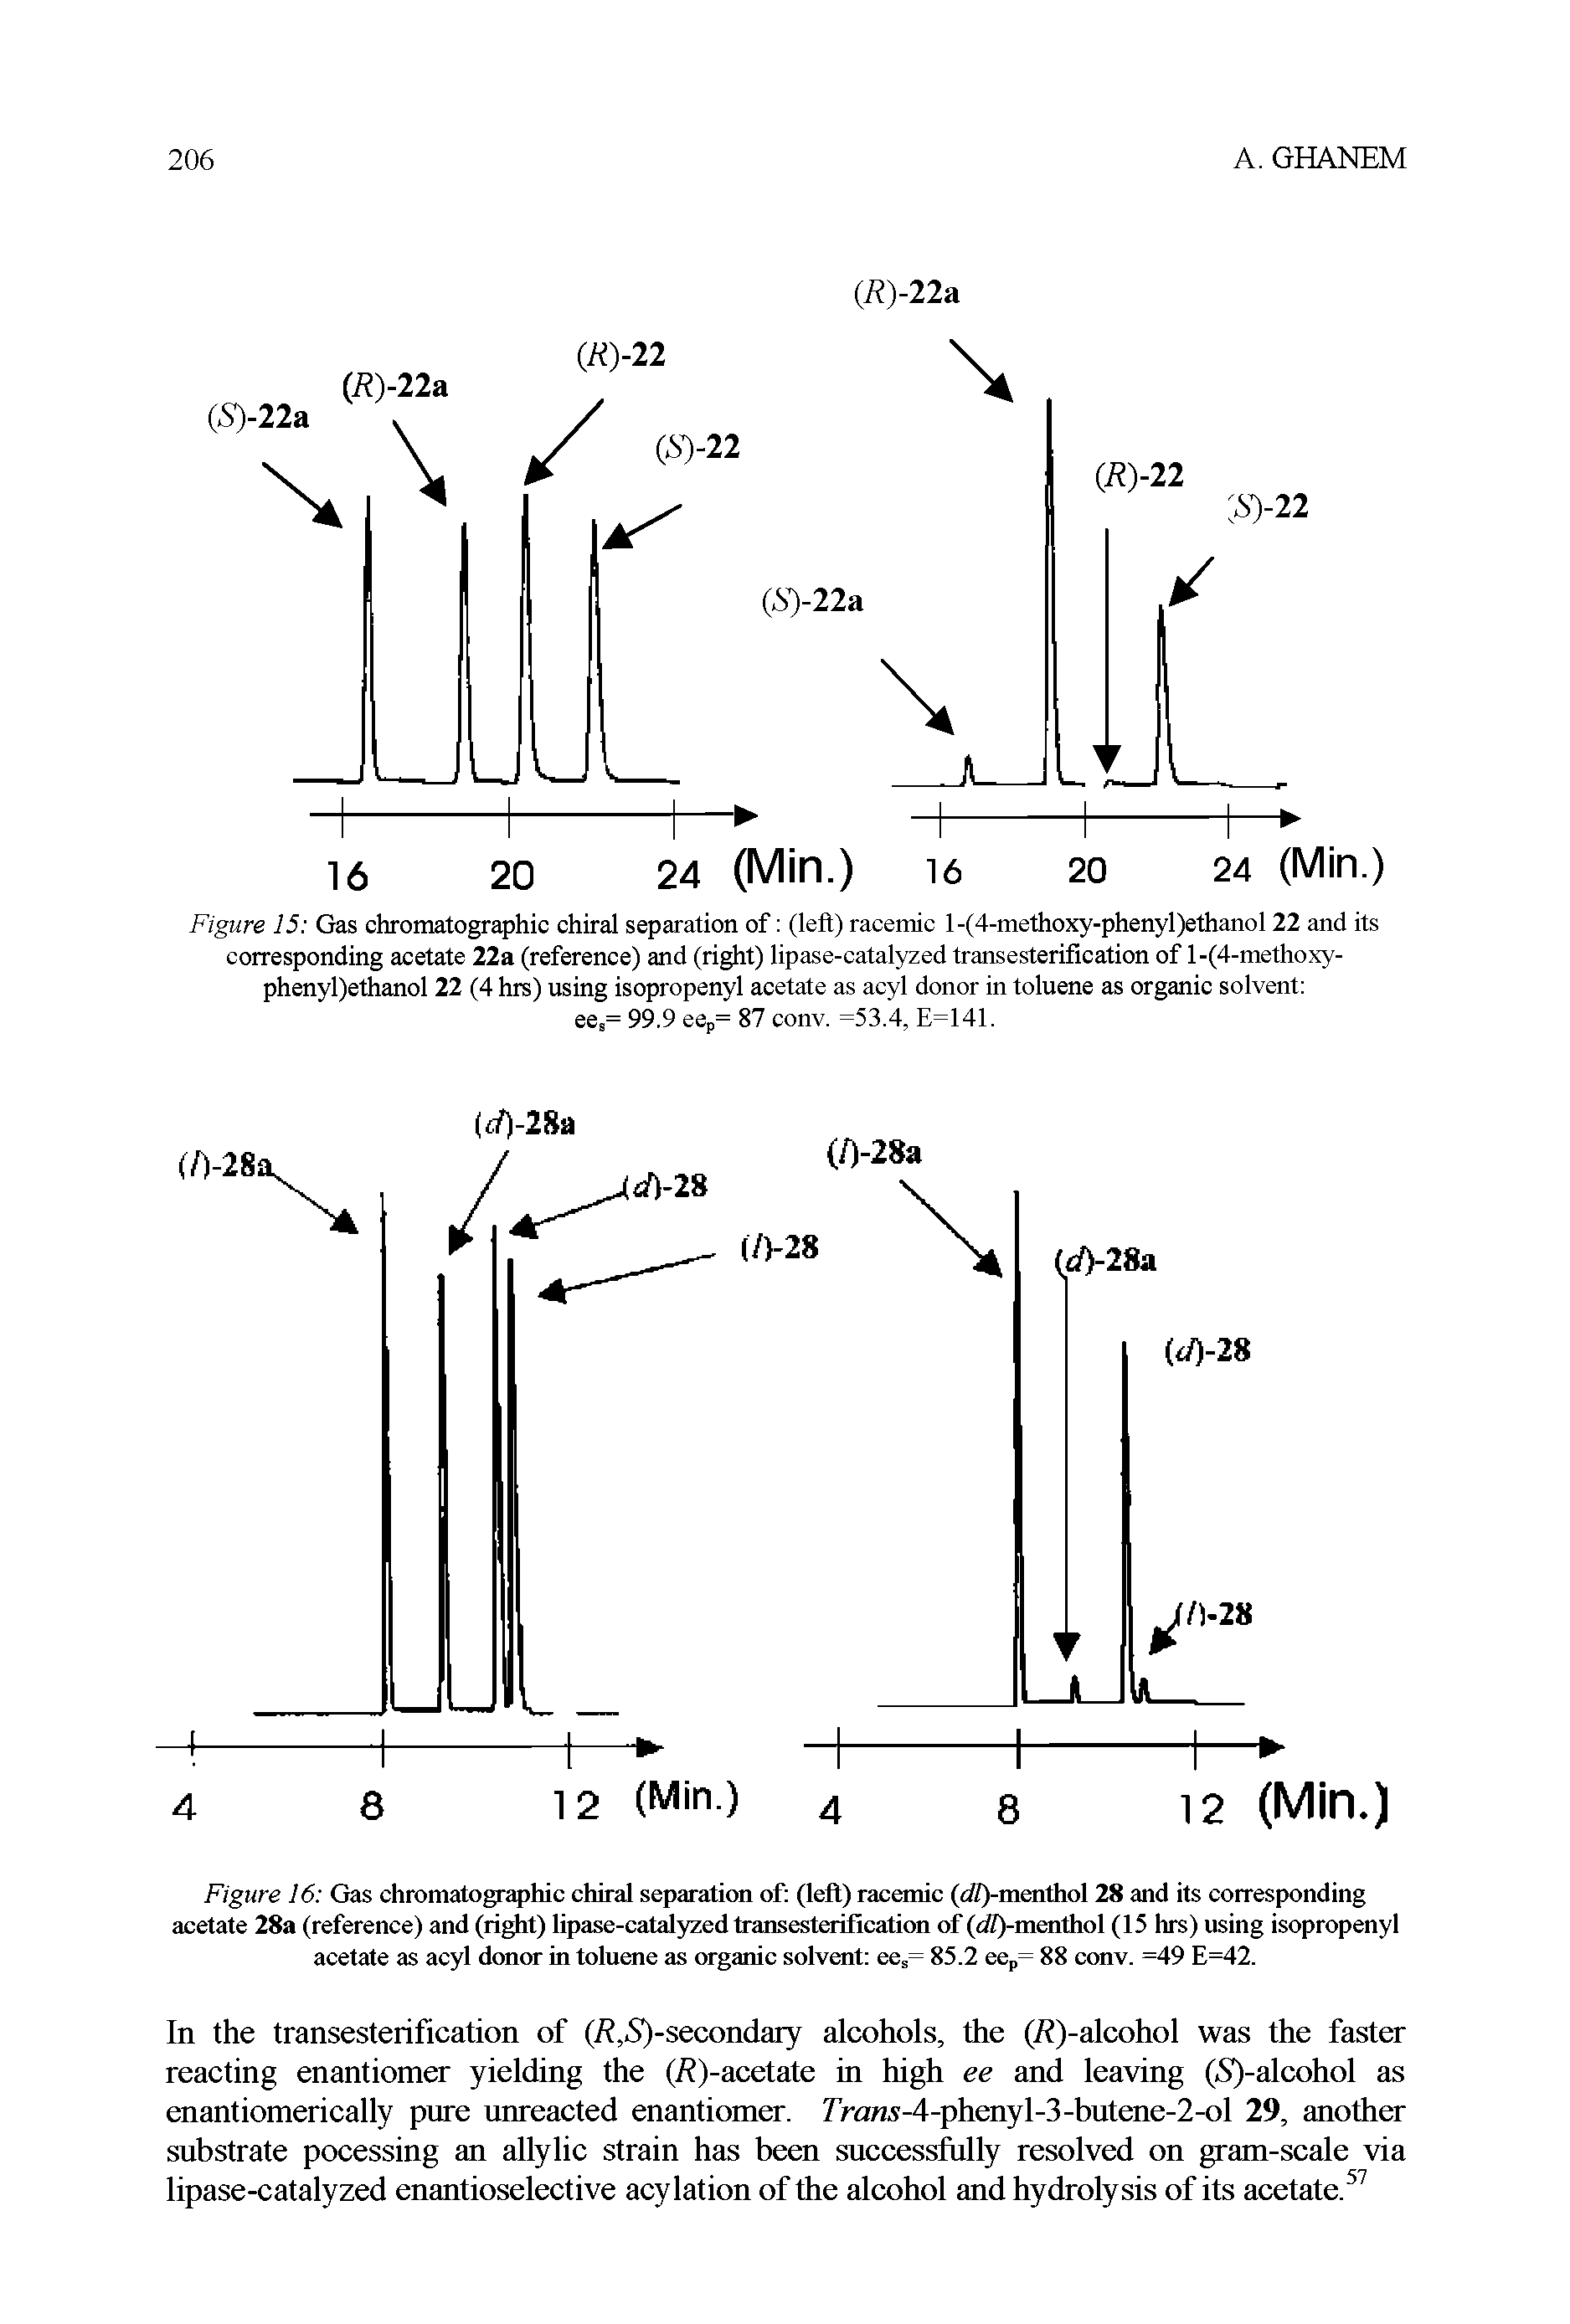 Figure 15 Gas chromatographic chiral separation of (left) racemic l-(4-methoxy-phenyl)ethanol 22 and its corresponding acetate 22a (reference) and (right) lipase-catalyzed transesterification of l-(4-methoxy-phenyl)ethanol 22 (4 hrs) using isopropenyl acetate as acyl donor in toluene as organic solvent ees= 99.9 eep= 87 conv. =53.4, E=141.